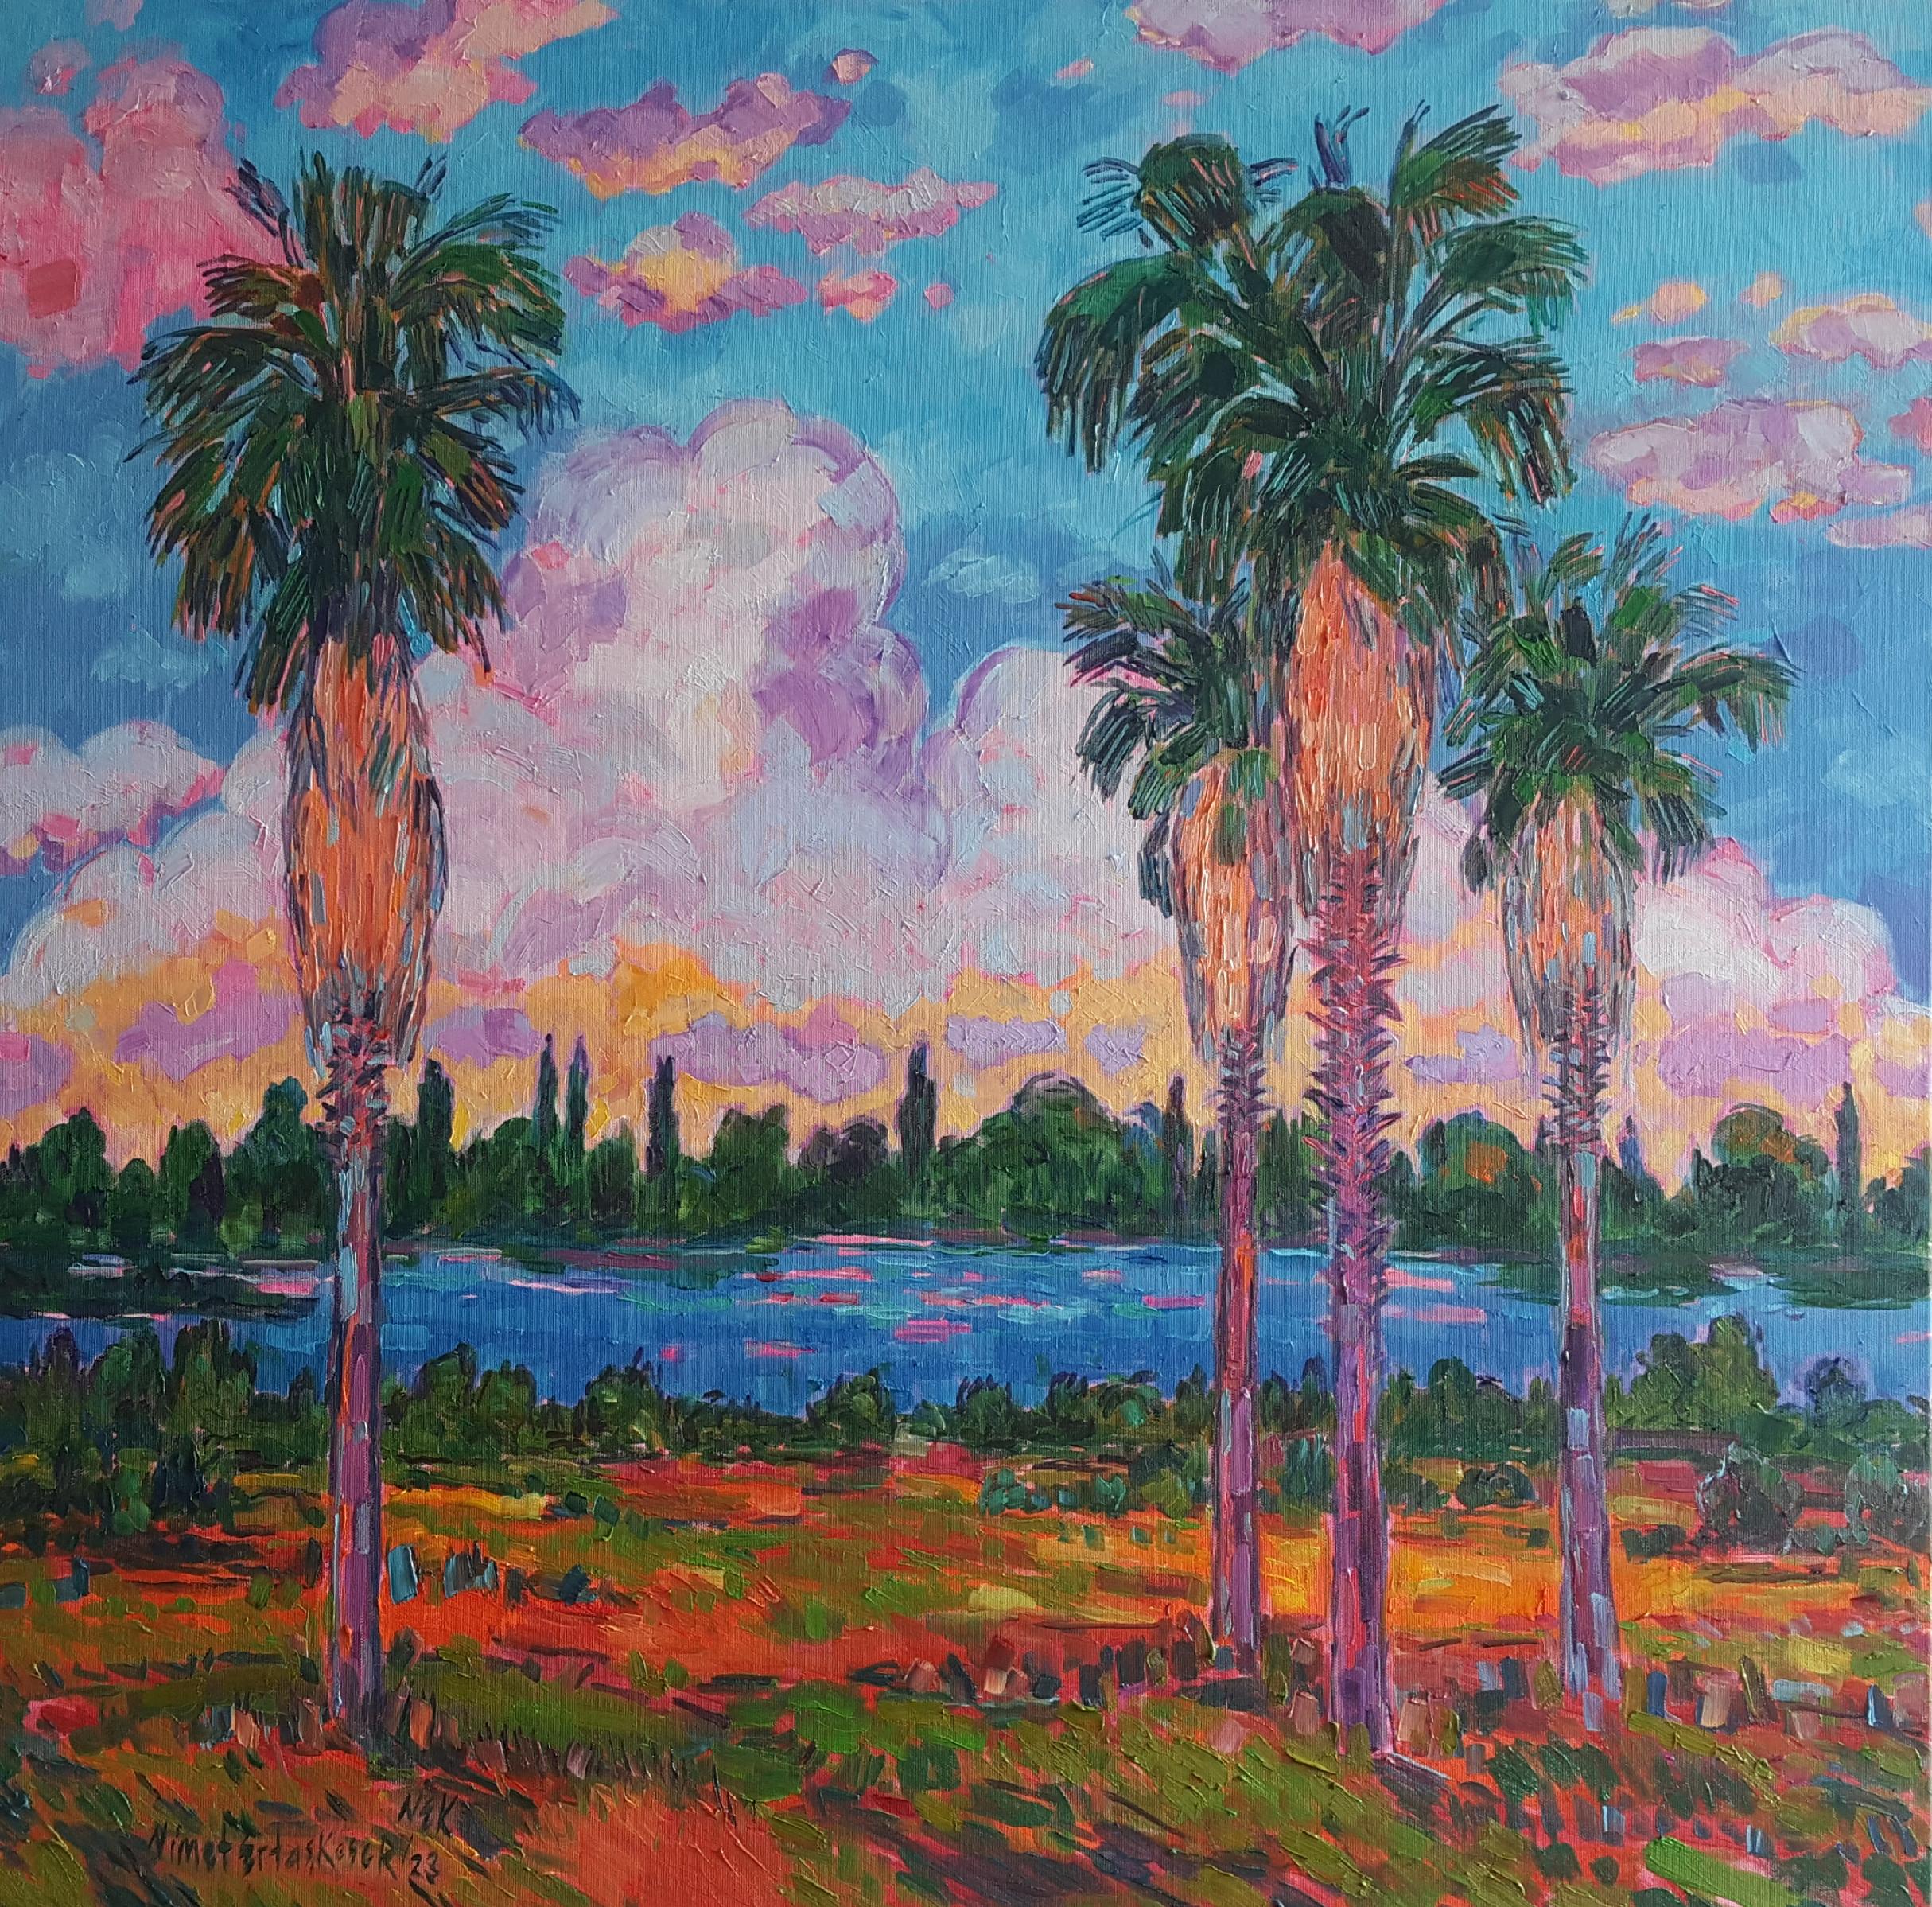 Palm trees by the River side & Sunset-original impressionism landscape painting